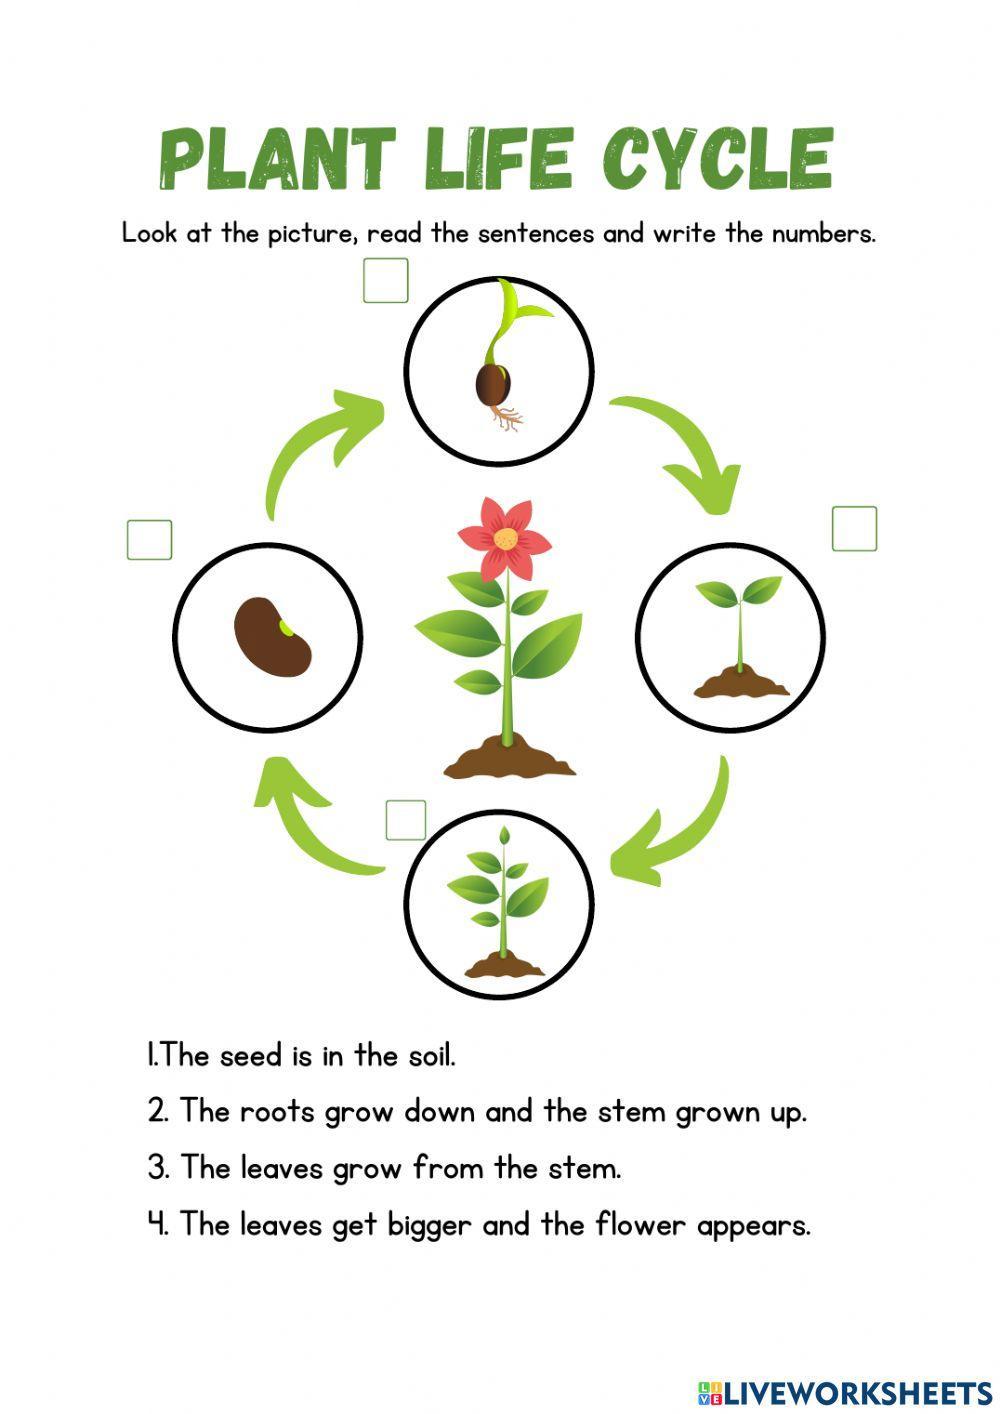 Life Cycle of a plant